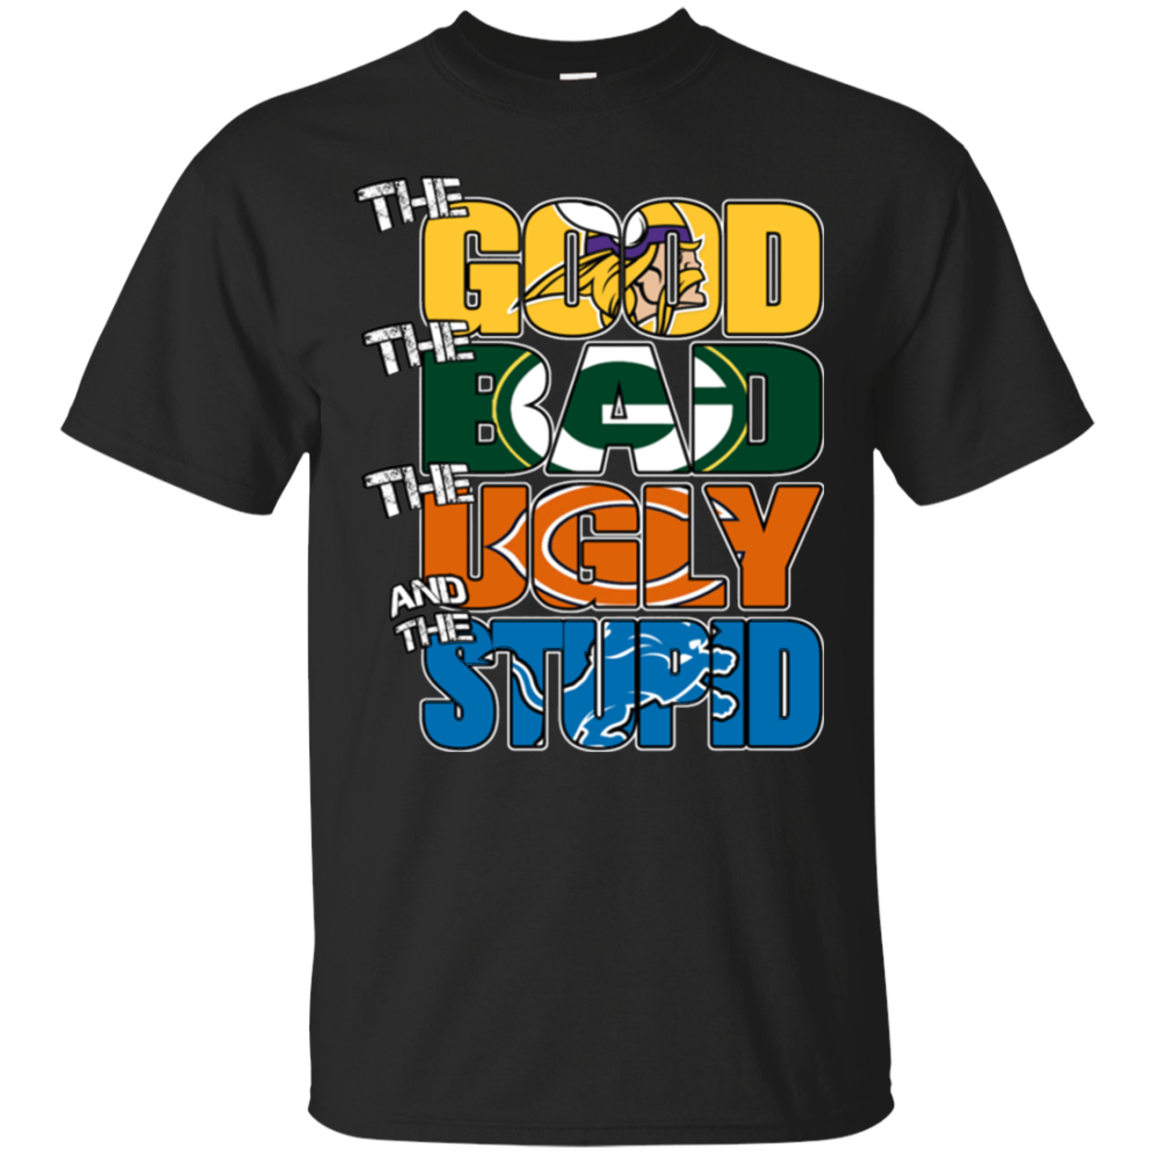 Minnesota Vikings - The Good The Bad The Ugly And The Stupid T-shirts T - Shirt For 